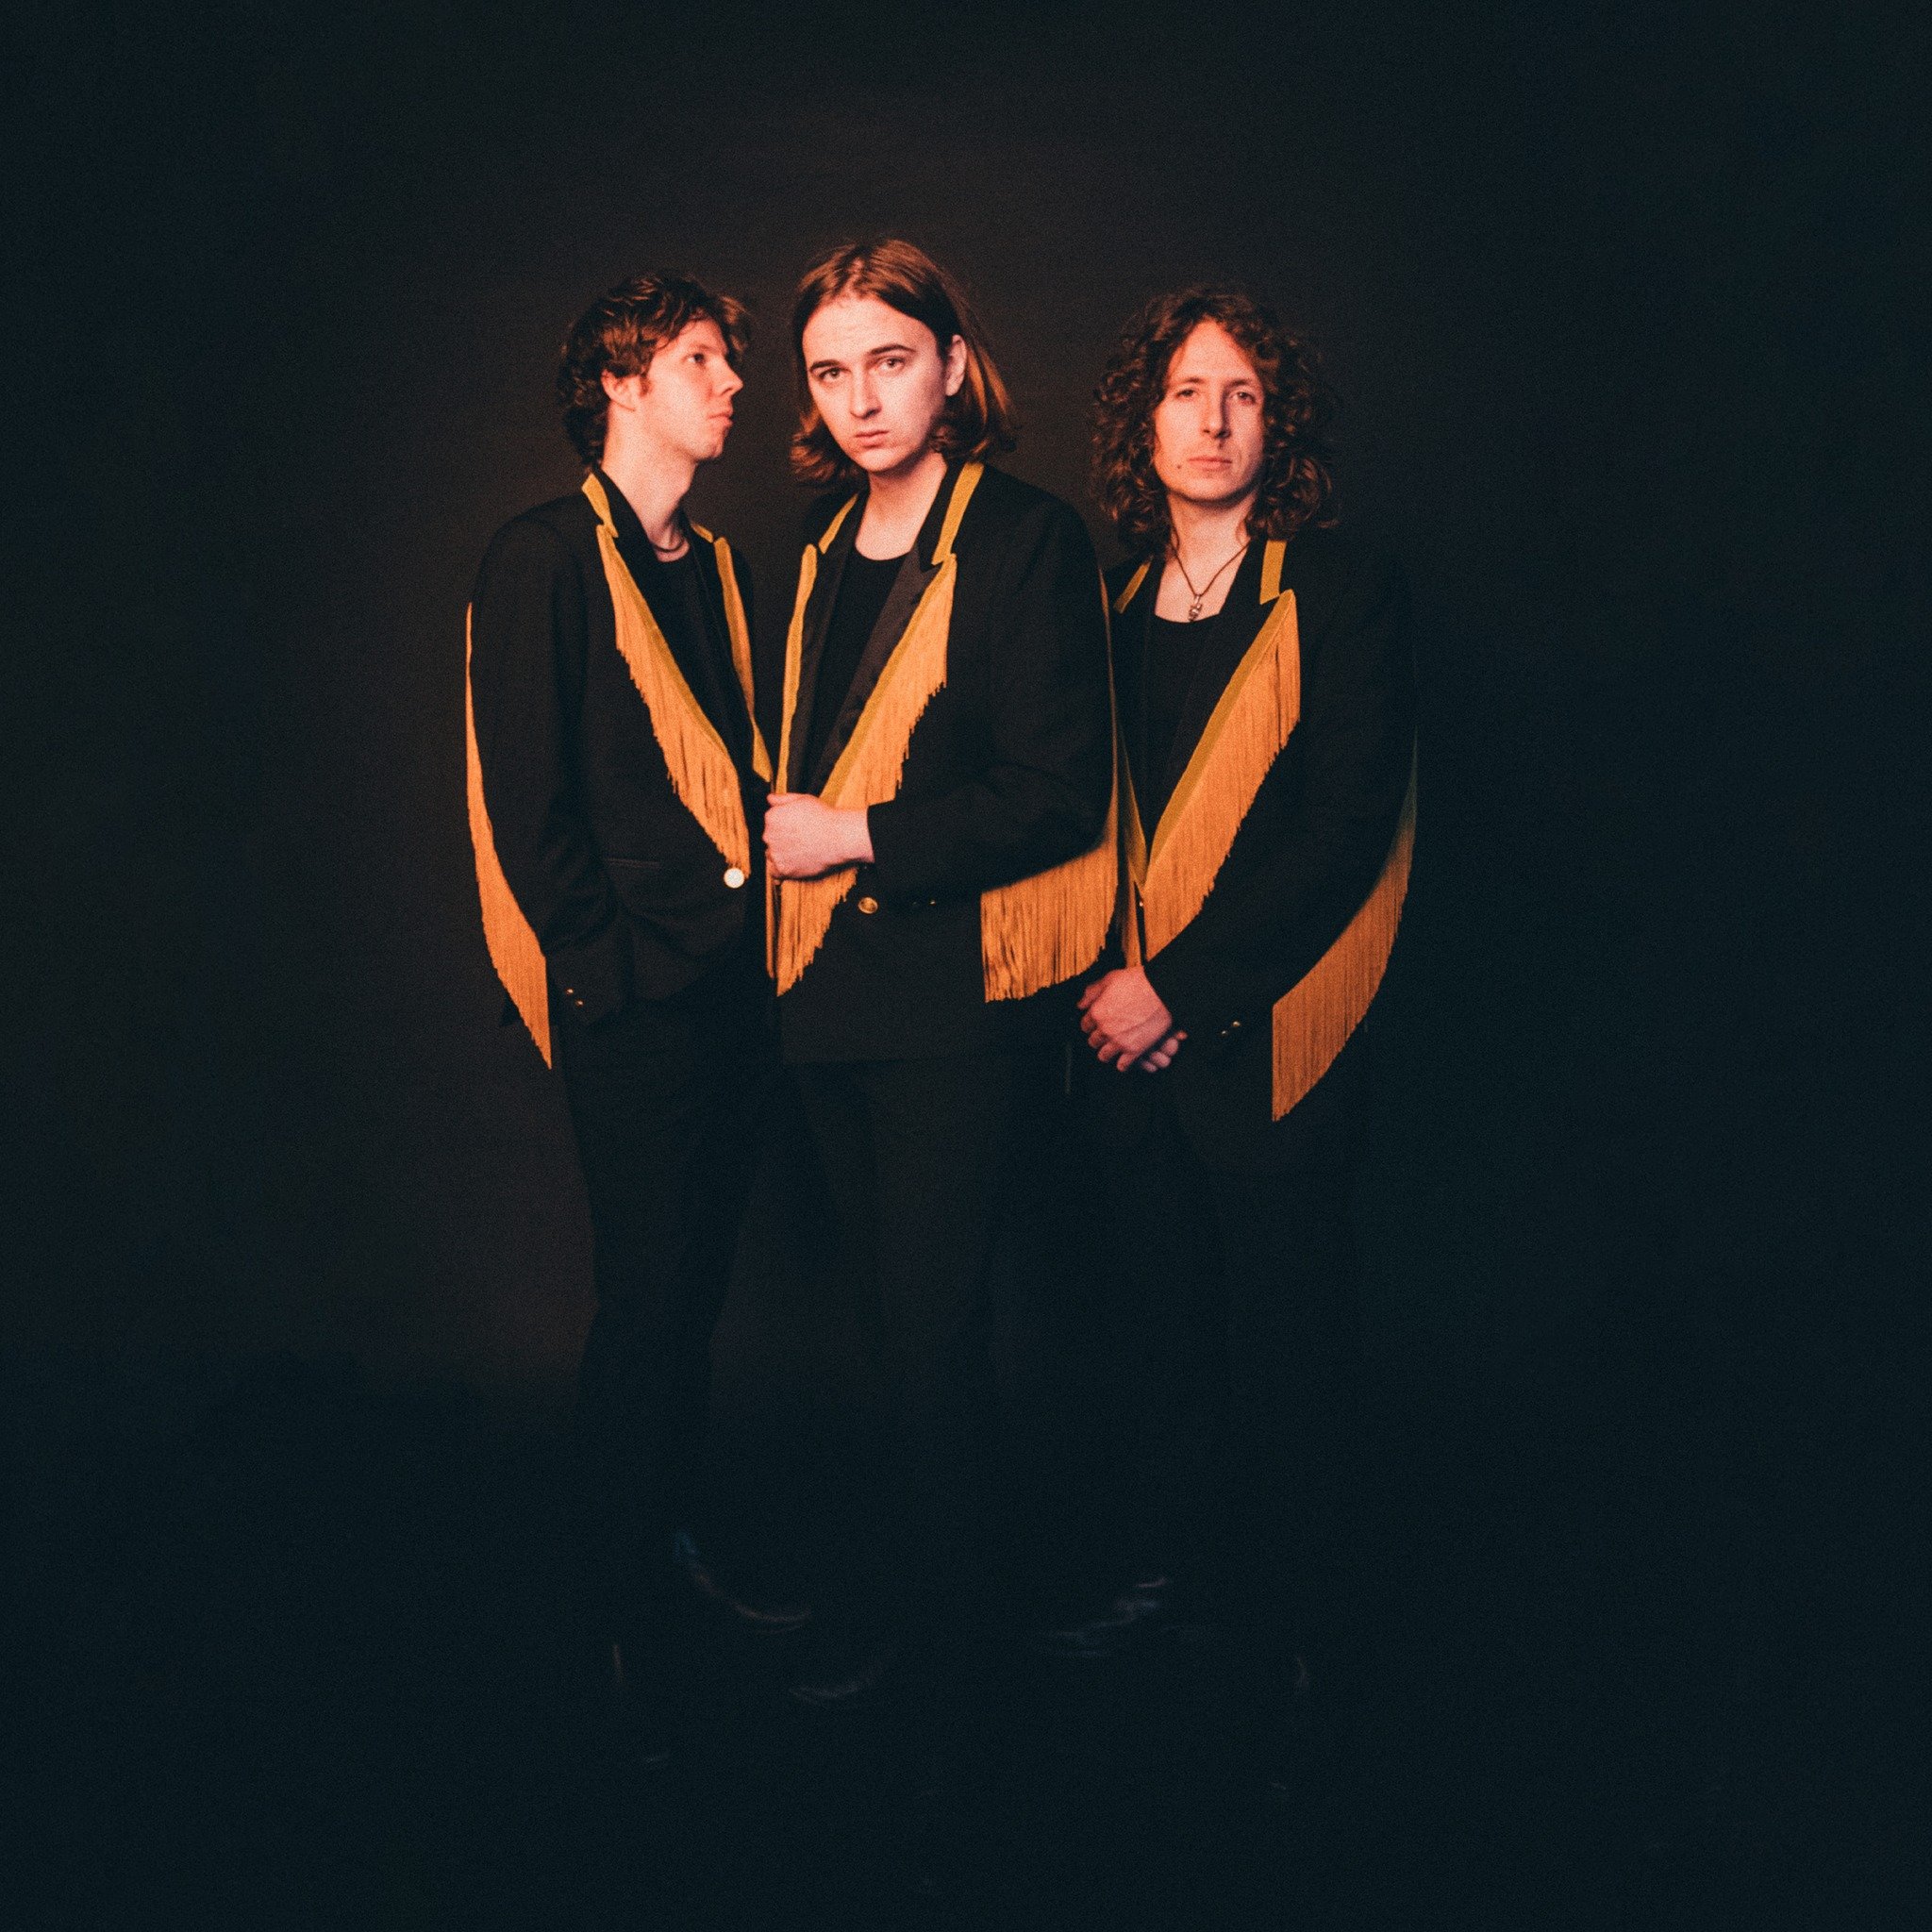 Adam Young of The Howlers (@thehowlersuk) spoke to us about their upcoming debut album, grief, loss and always appreciating the fans. 

Read the full interview via the link in bio.

-
-
#thehowlers #thehowlersuk #interview #desertrock #rockmusic #the